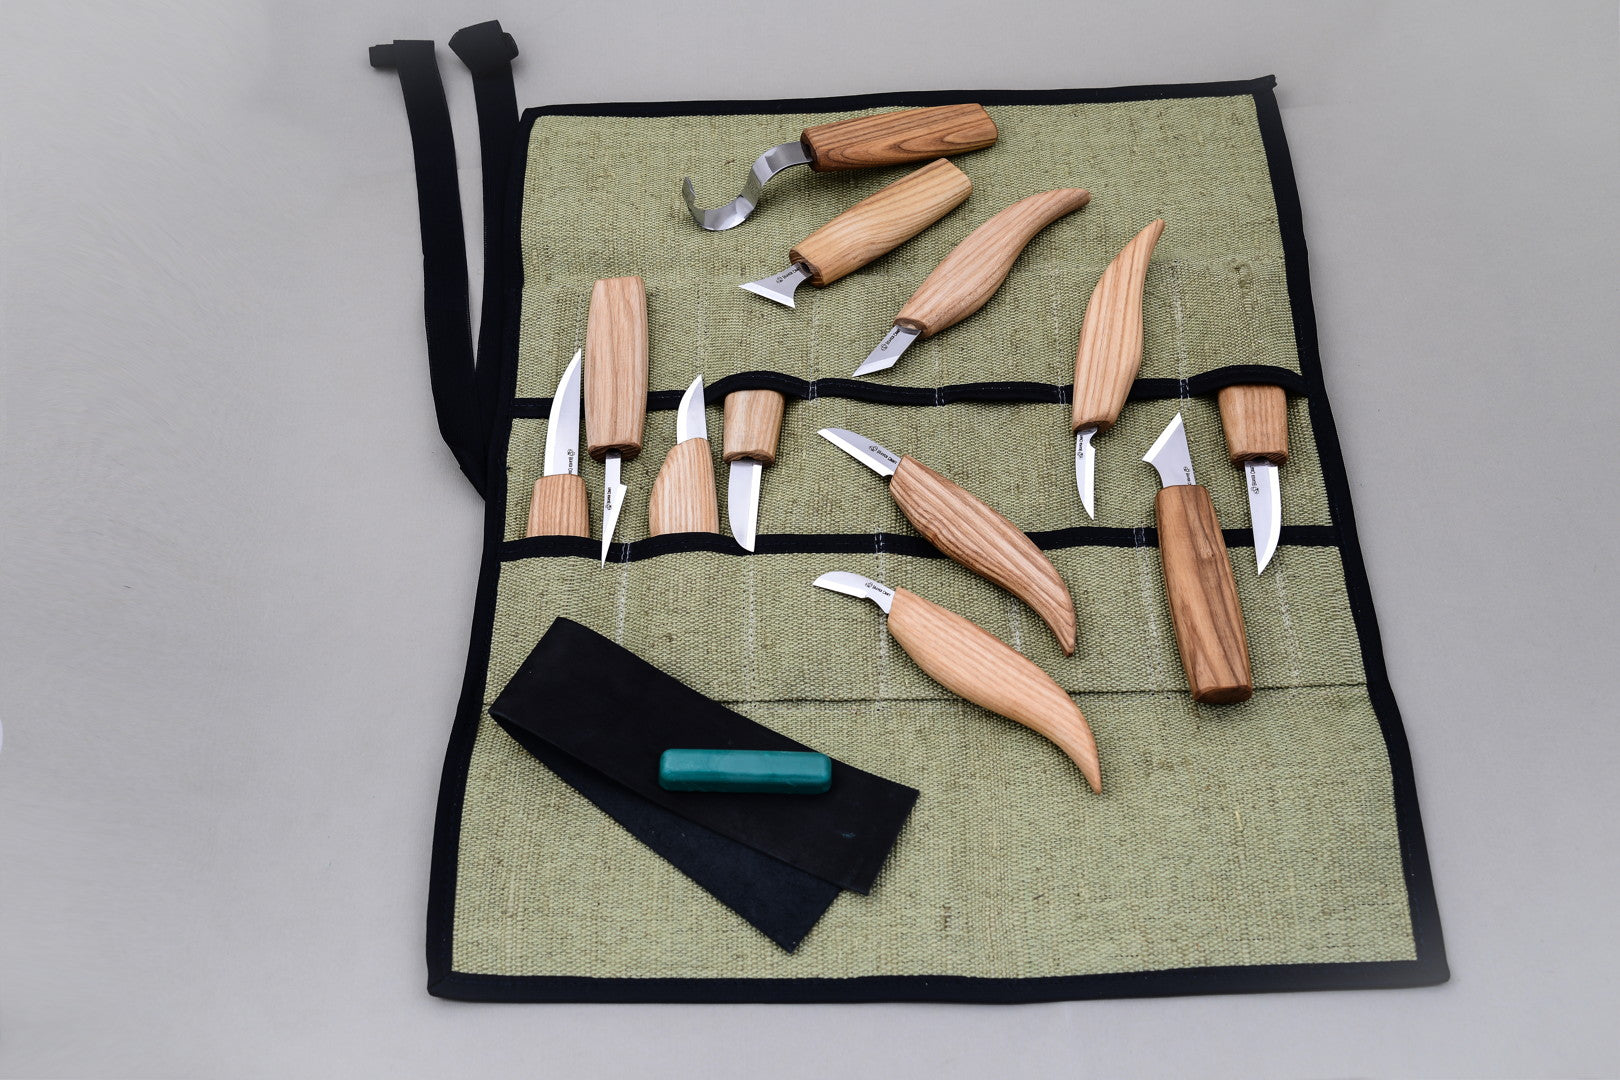 JJ CARE Wood Carving Kit [12 SK2 Wood Carving Knives with Case, 10 Basswood  Carving Blocks, and 1 Grinding Stone] - Beginner Wood Carving Kit, Wood